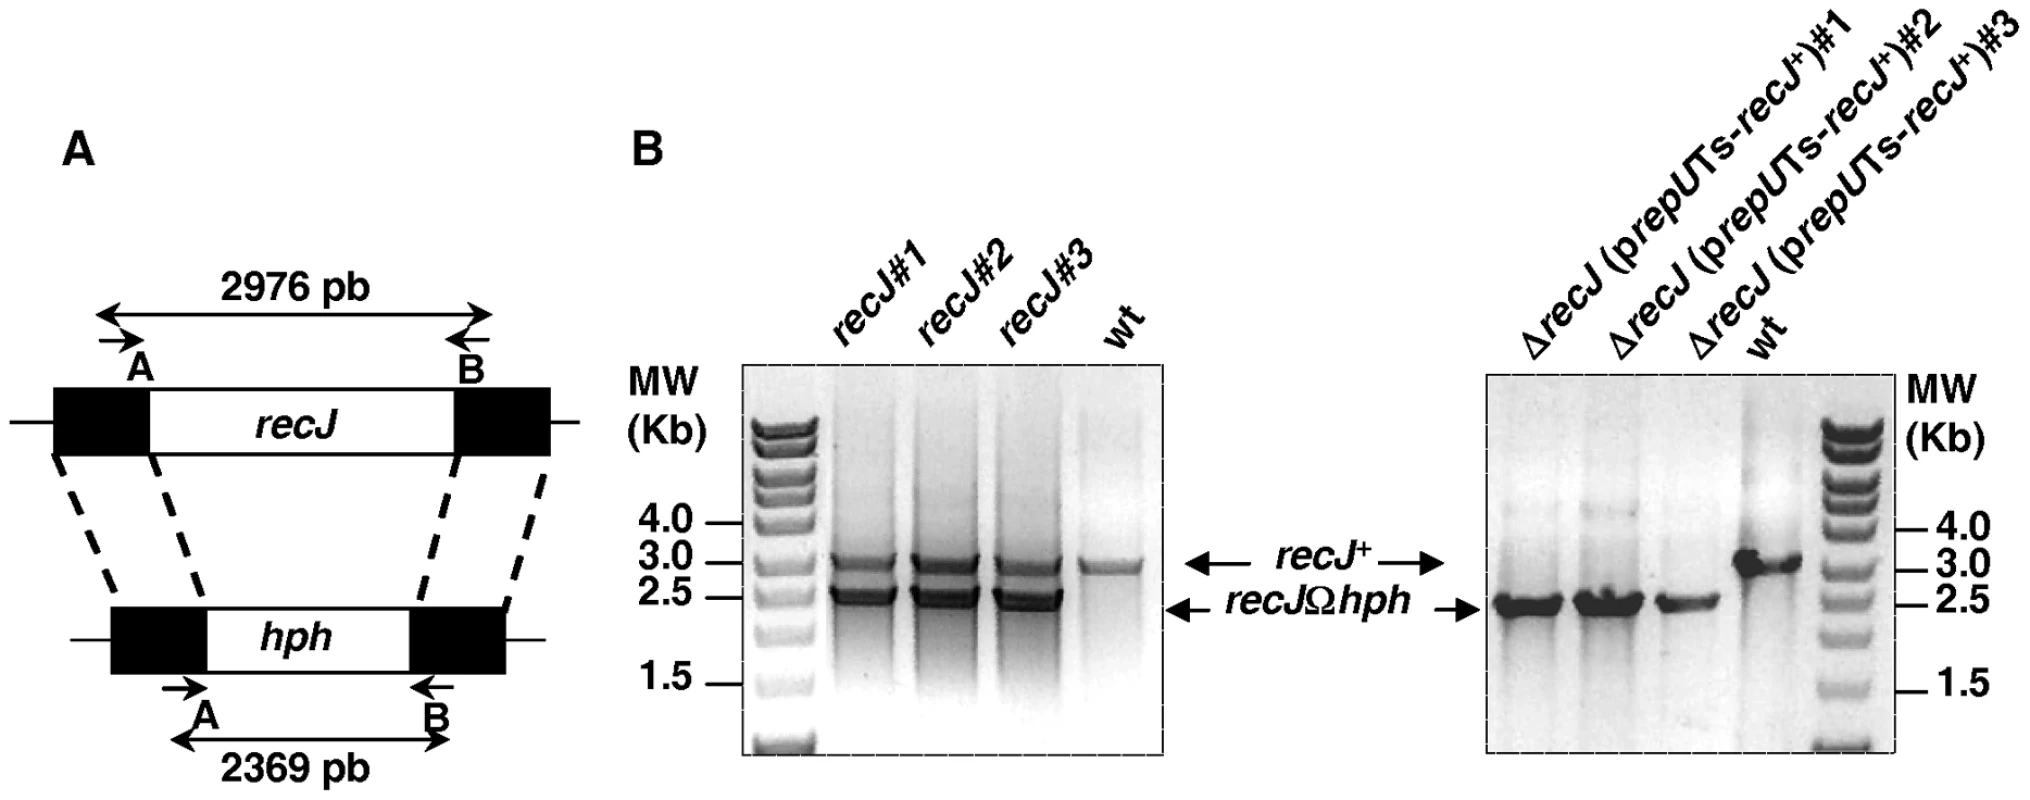 Schematic representation and test of deletion-substitution in the <i>D. radiodurans recJ</i> gene.